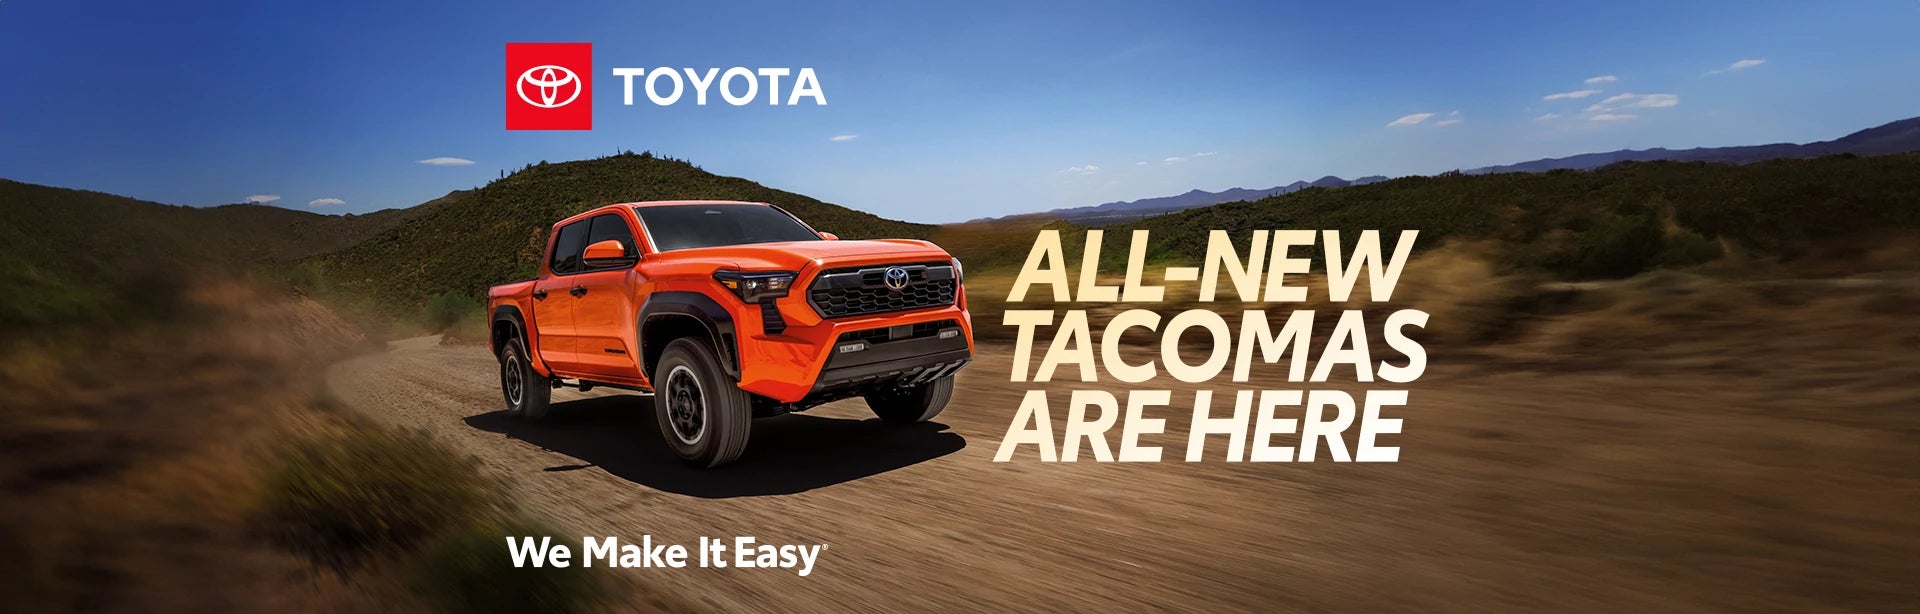 All New Tacomas Are Here at Gosch Toyota Hemet